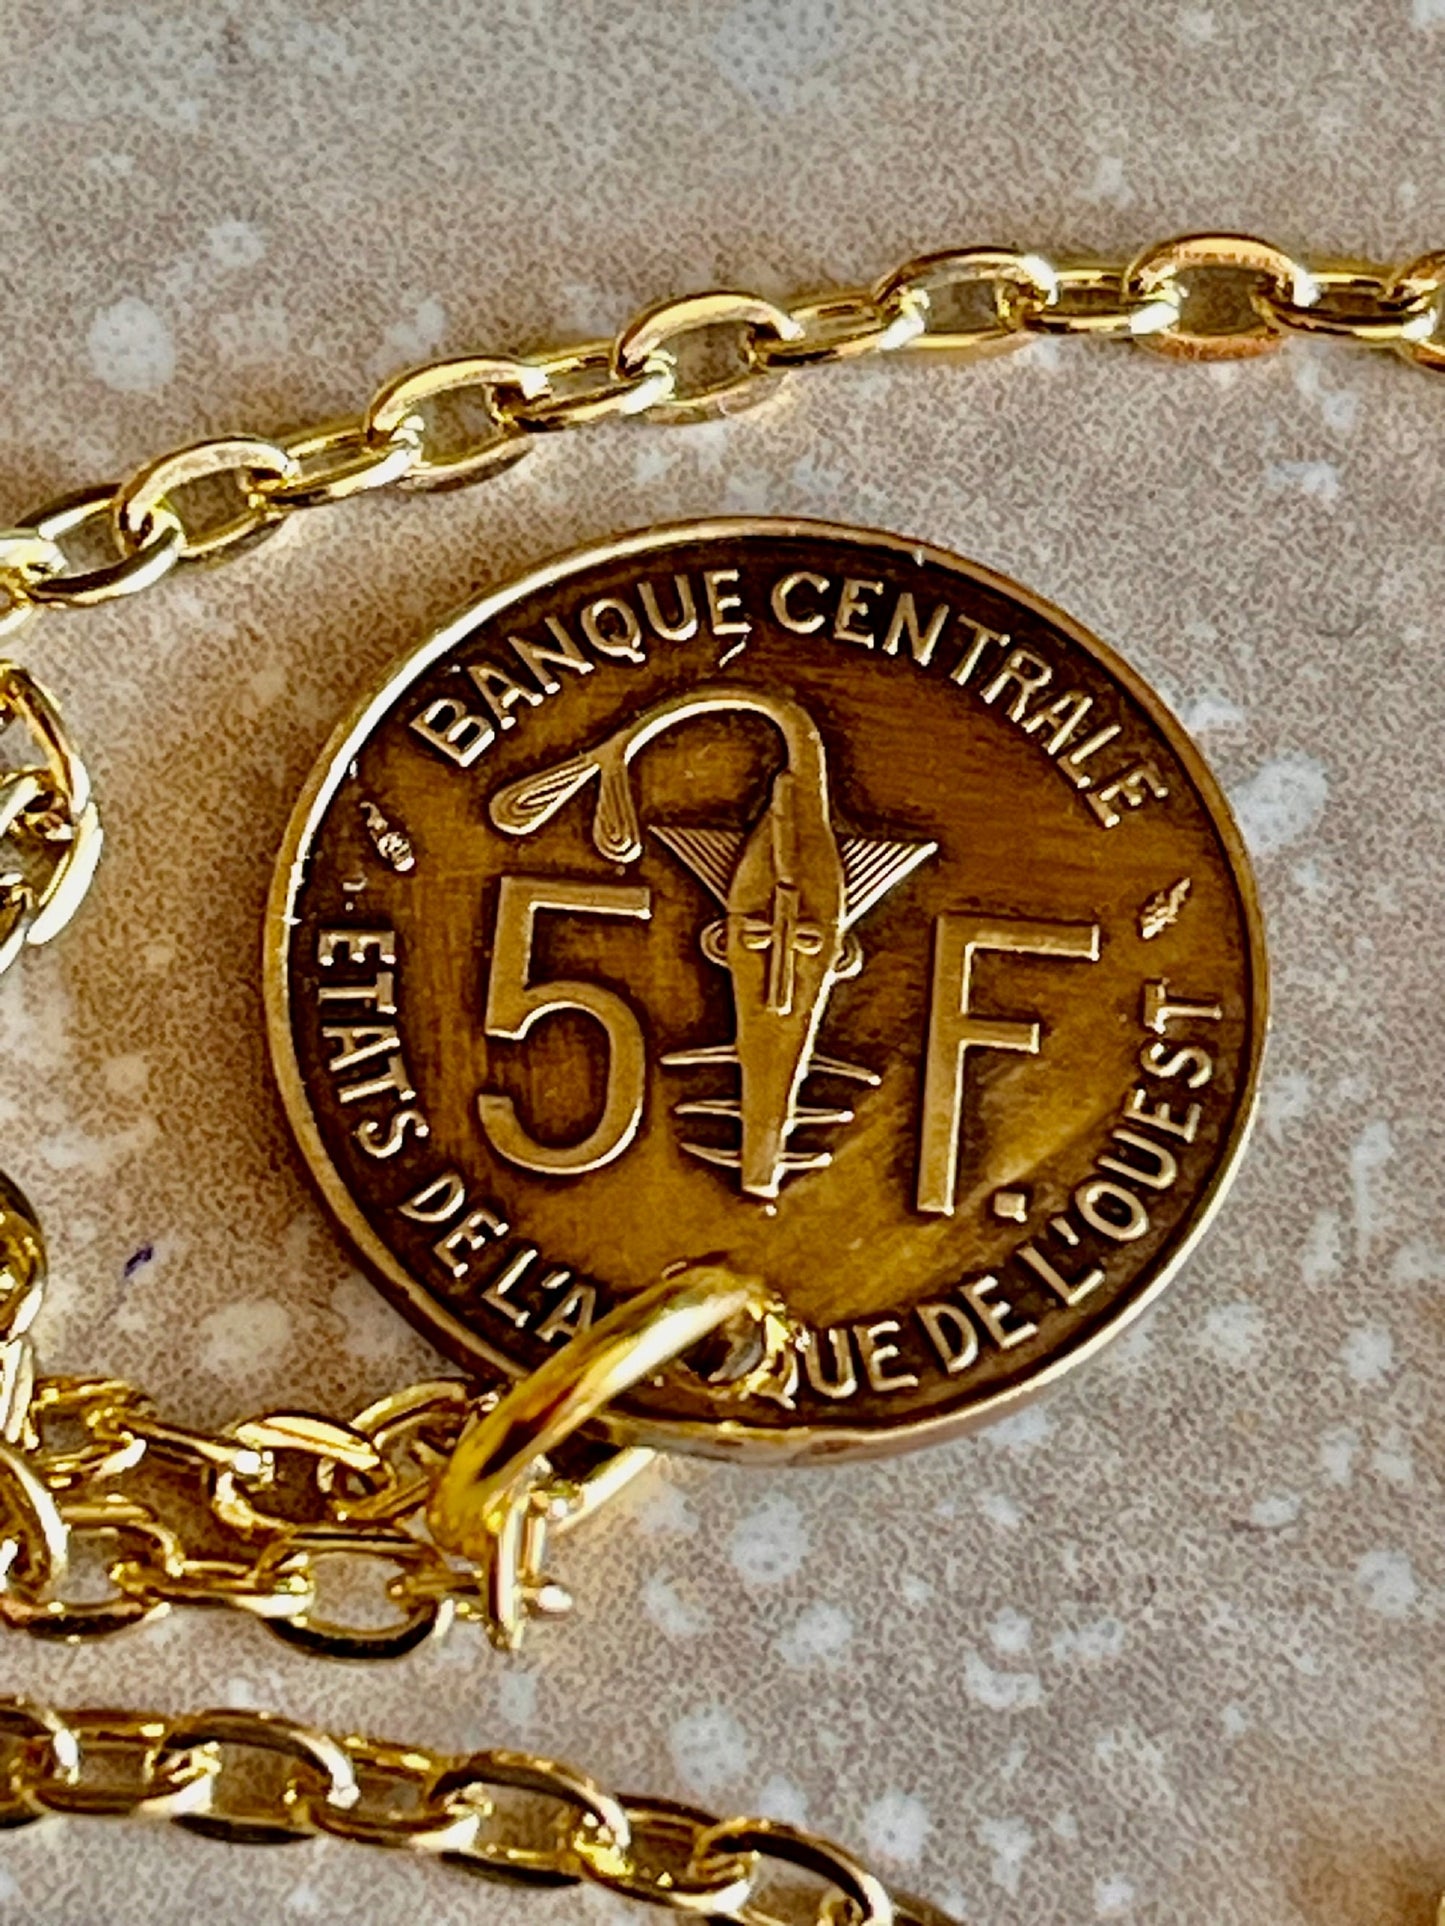 South Africa Coin 5 Francs African Pendant Necklace Fashion Jewelry Gift For Friend Coin Charm Gift For Him, Her, World Coins Collector